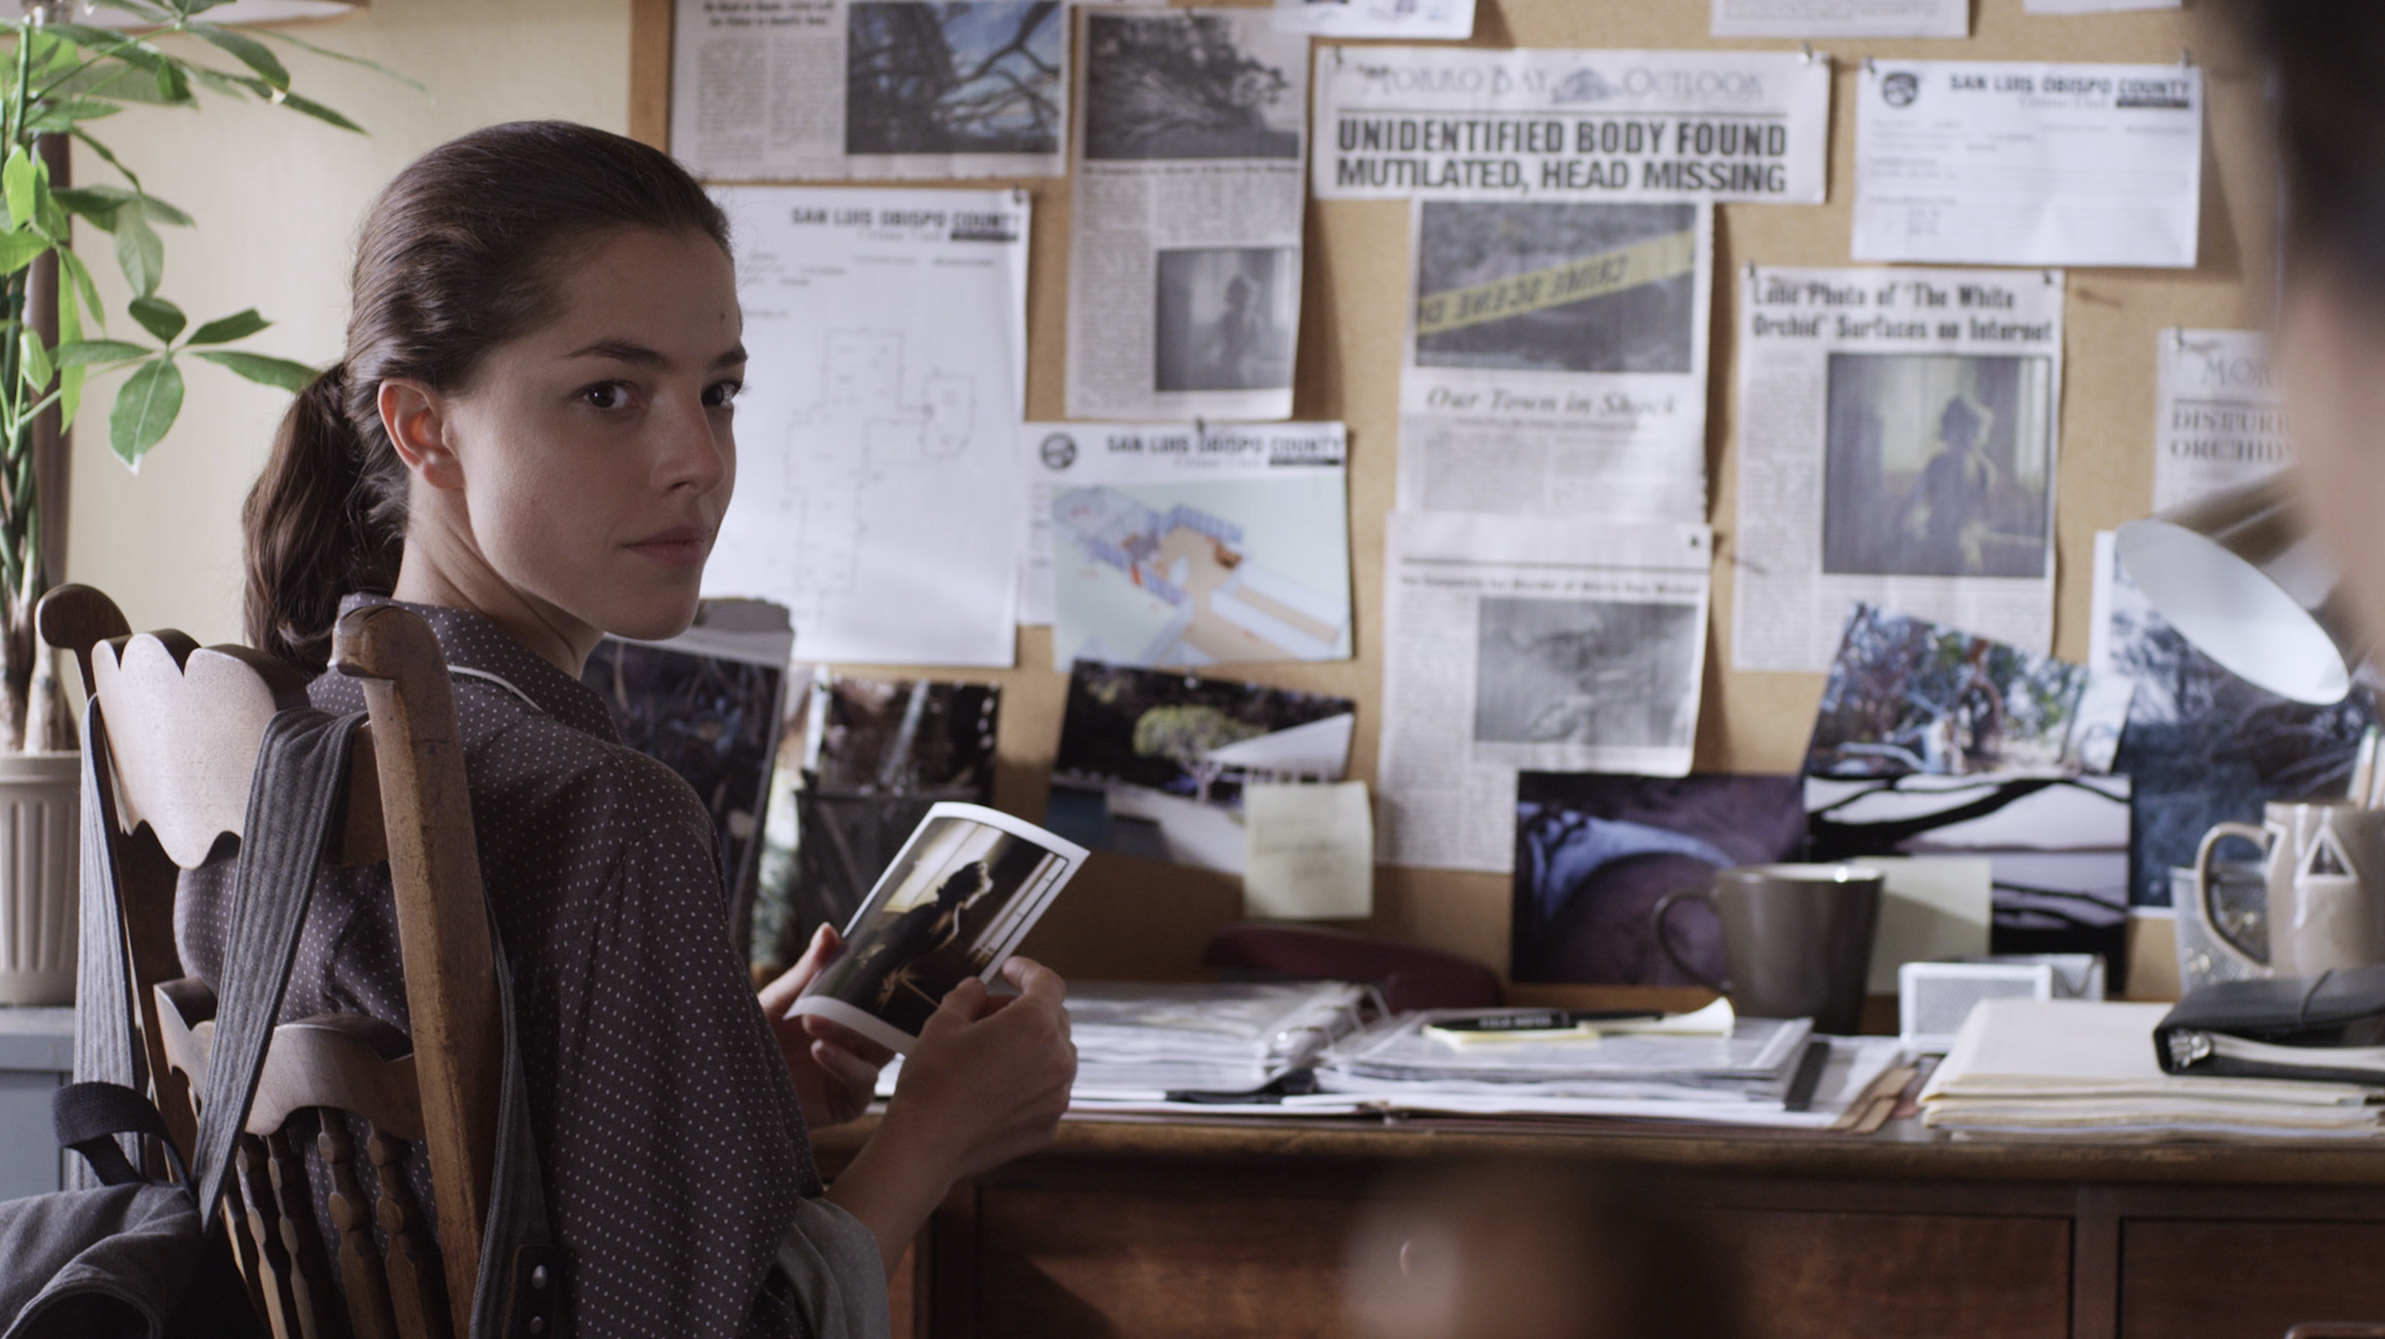 THE WHITE ORCHID: Olivia Thirlby Flirts With Danger in Trailer For Neo Noir Thriller2385 x 1339